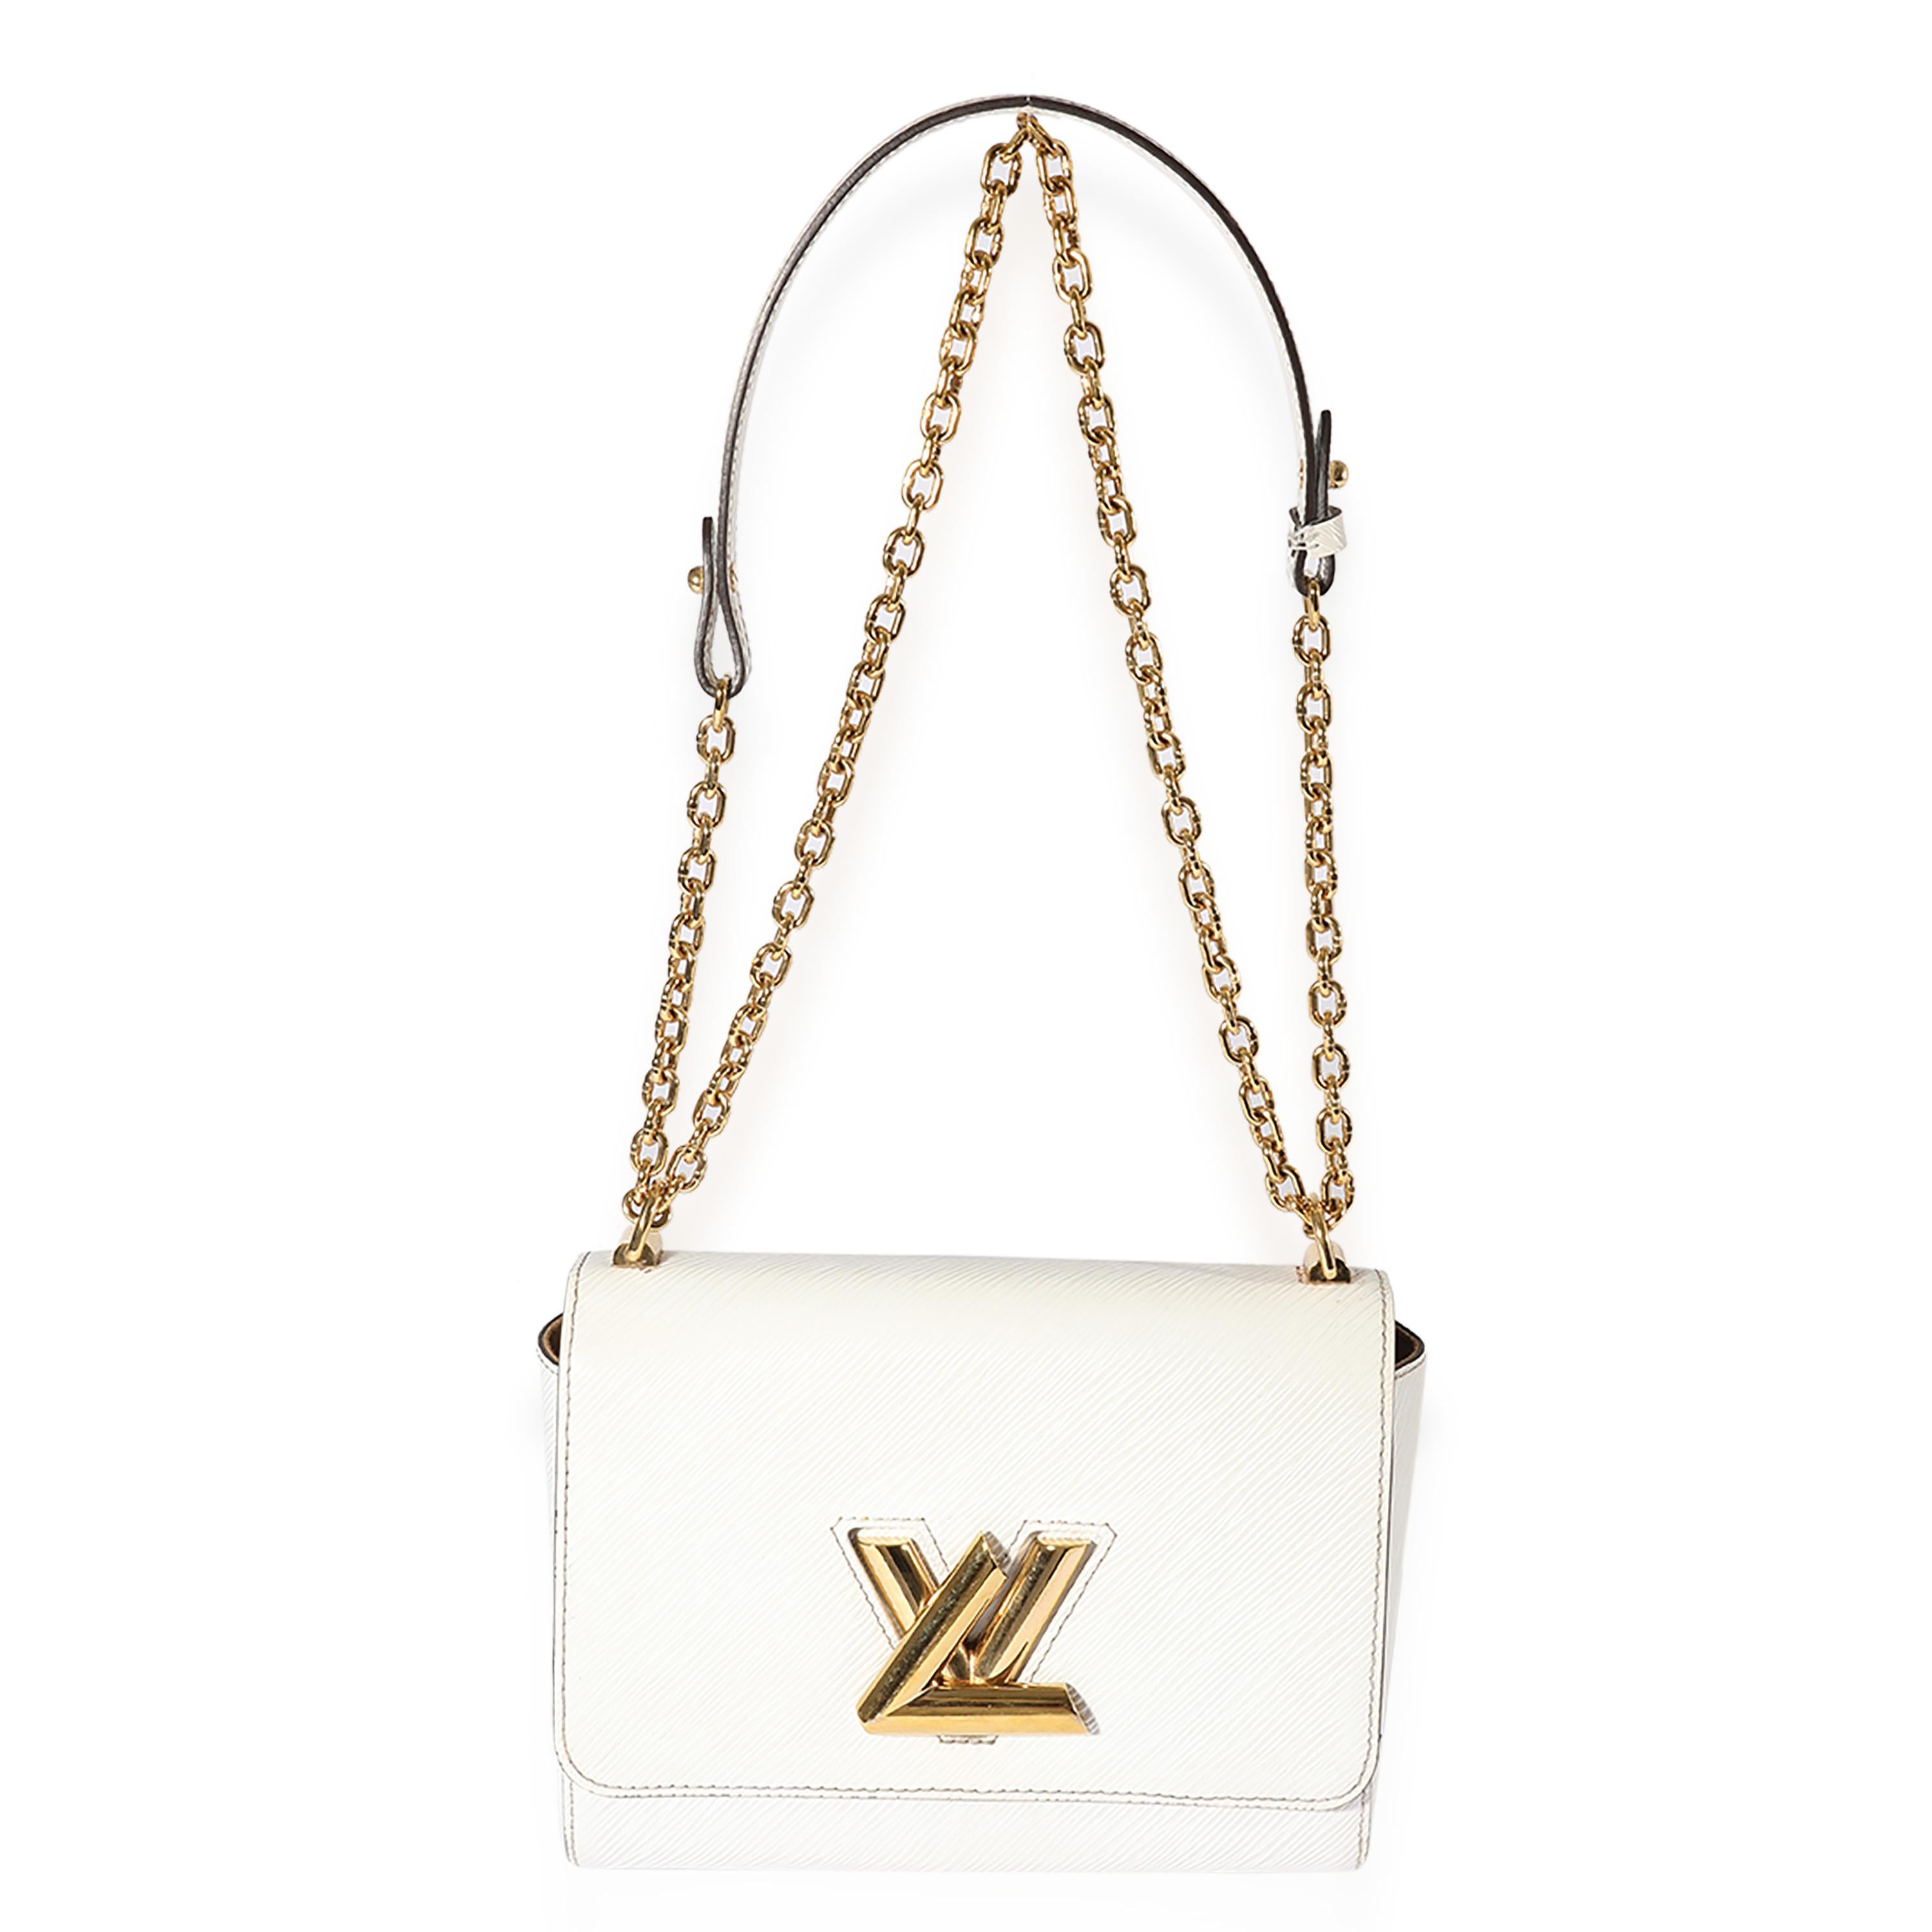 Listing Title: Louis Vuitton White Epi Twist MM
SKU: 122971
MSRP: 4700.00
Condition: Pre-owned 
Handbag Condition: Very Good
Condition Comments: Very Good Condition. Heavy scuffing and marks throughout exterior. Some discoloration. Scratching at